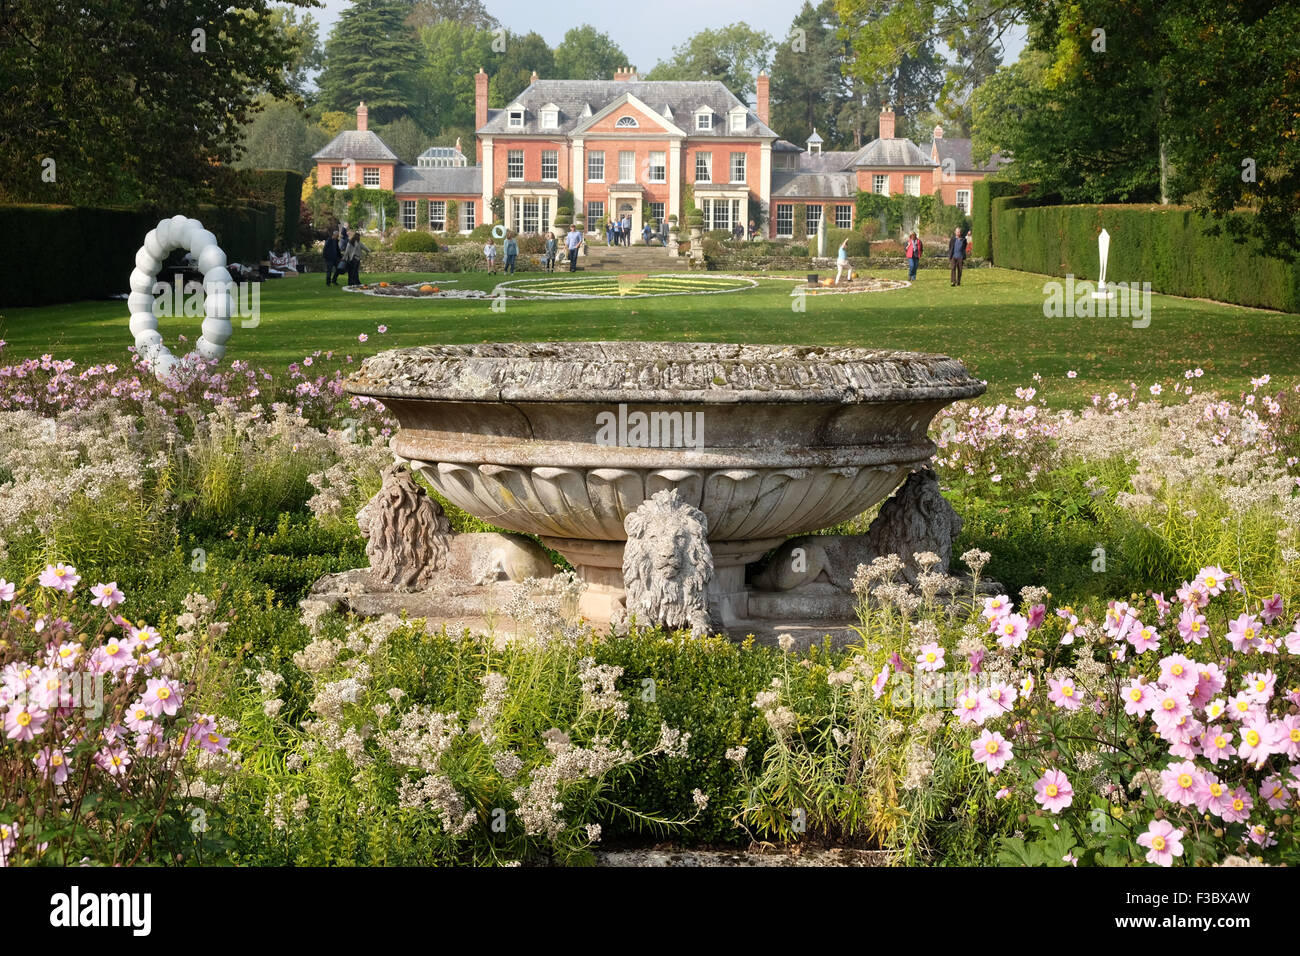 Newport House, Almeley, Herefordshire UK - Sunday 4th October 2015 - Opening day for the Out of Nature sculpture exhibition featuring over 200 pieces of work from 40 artists displayed in the formal gardens of Newport House. The exhibition in the formal gardens runs until October 25th 2015. Stock Photo